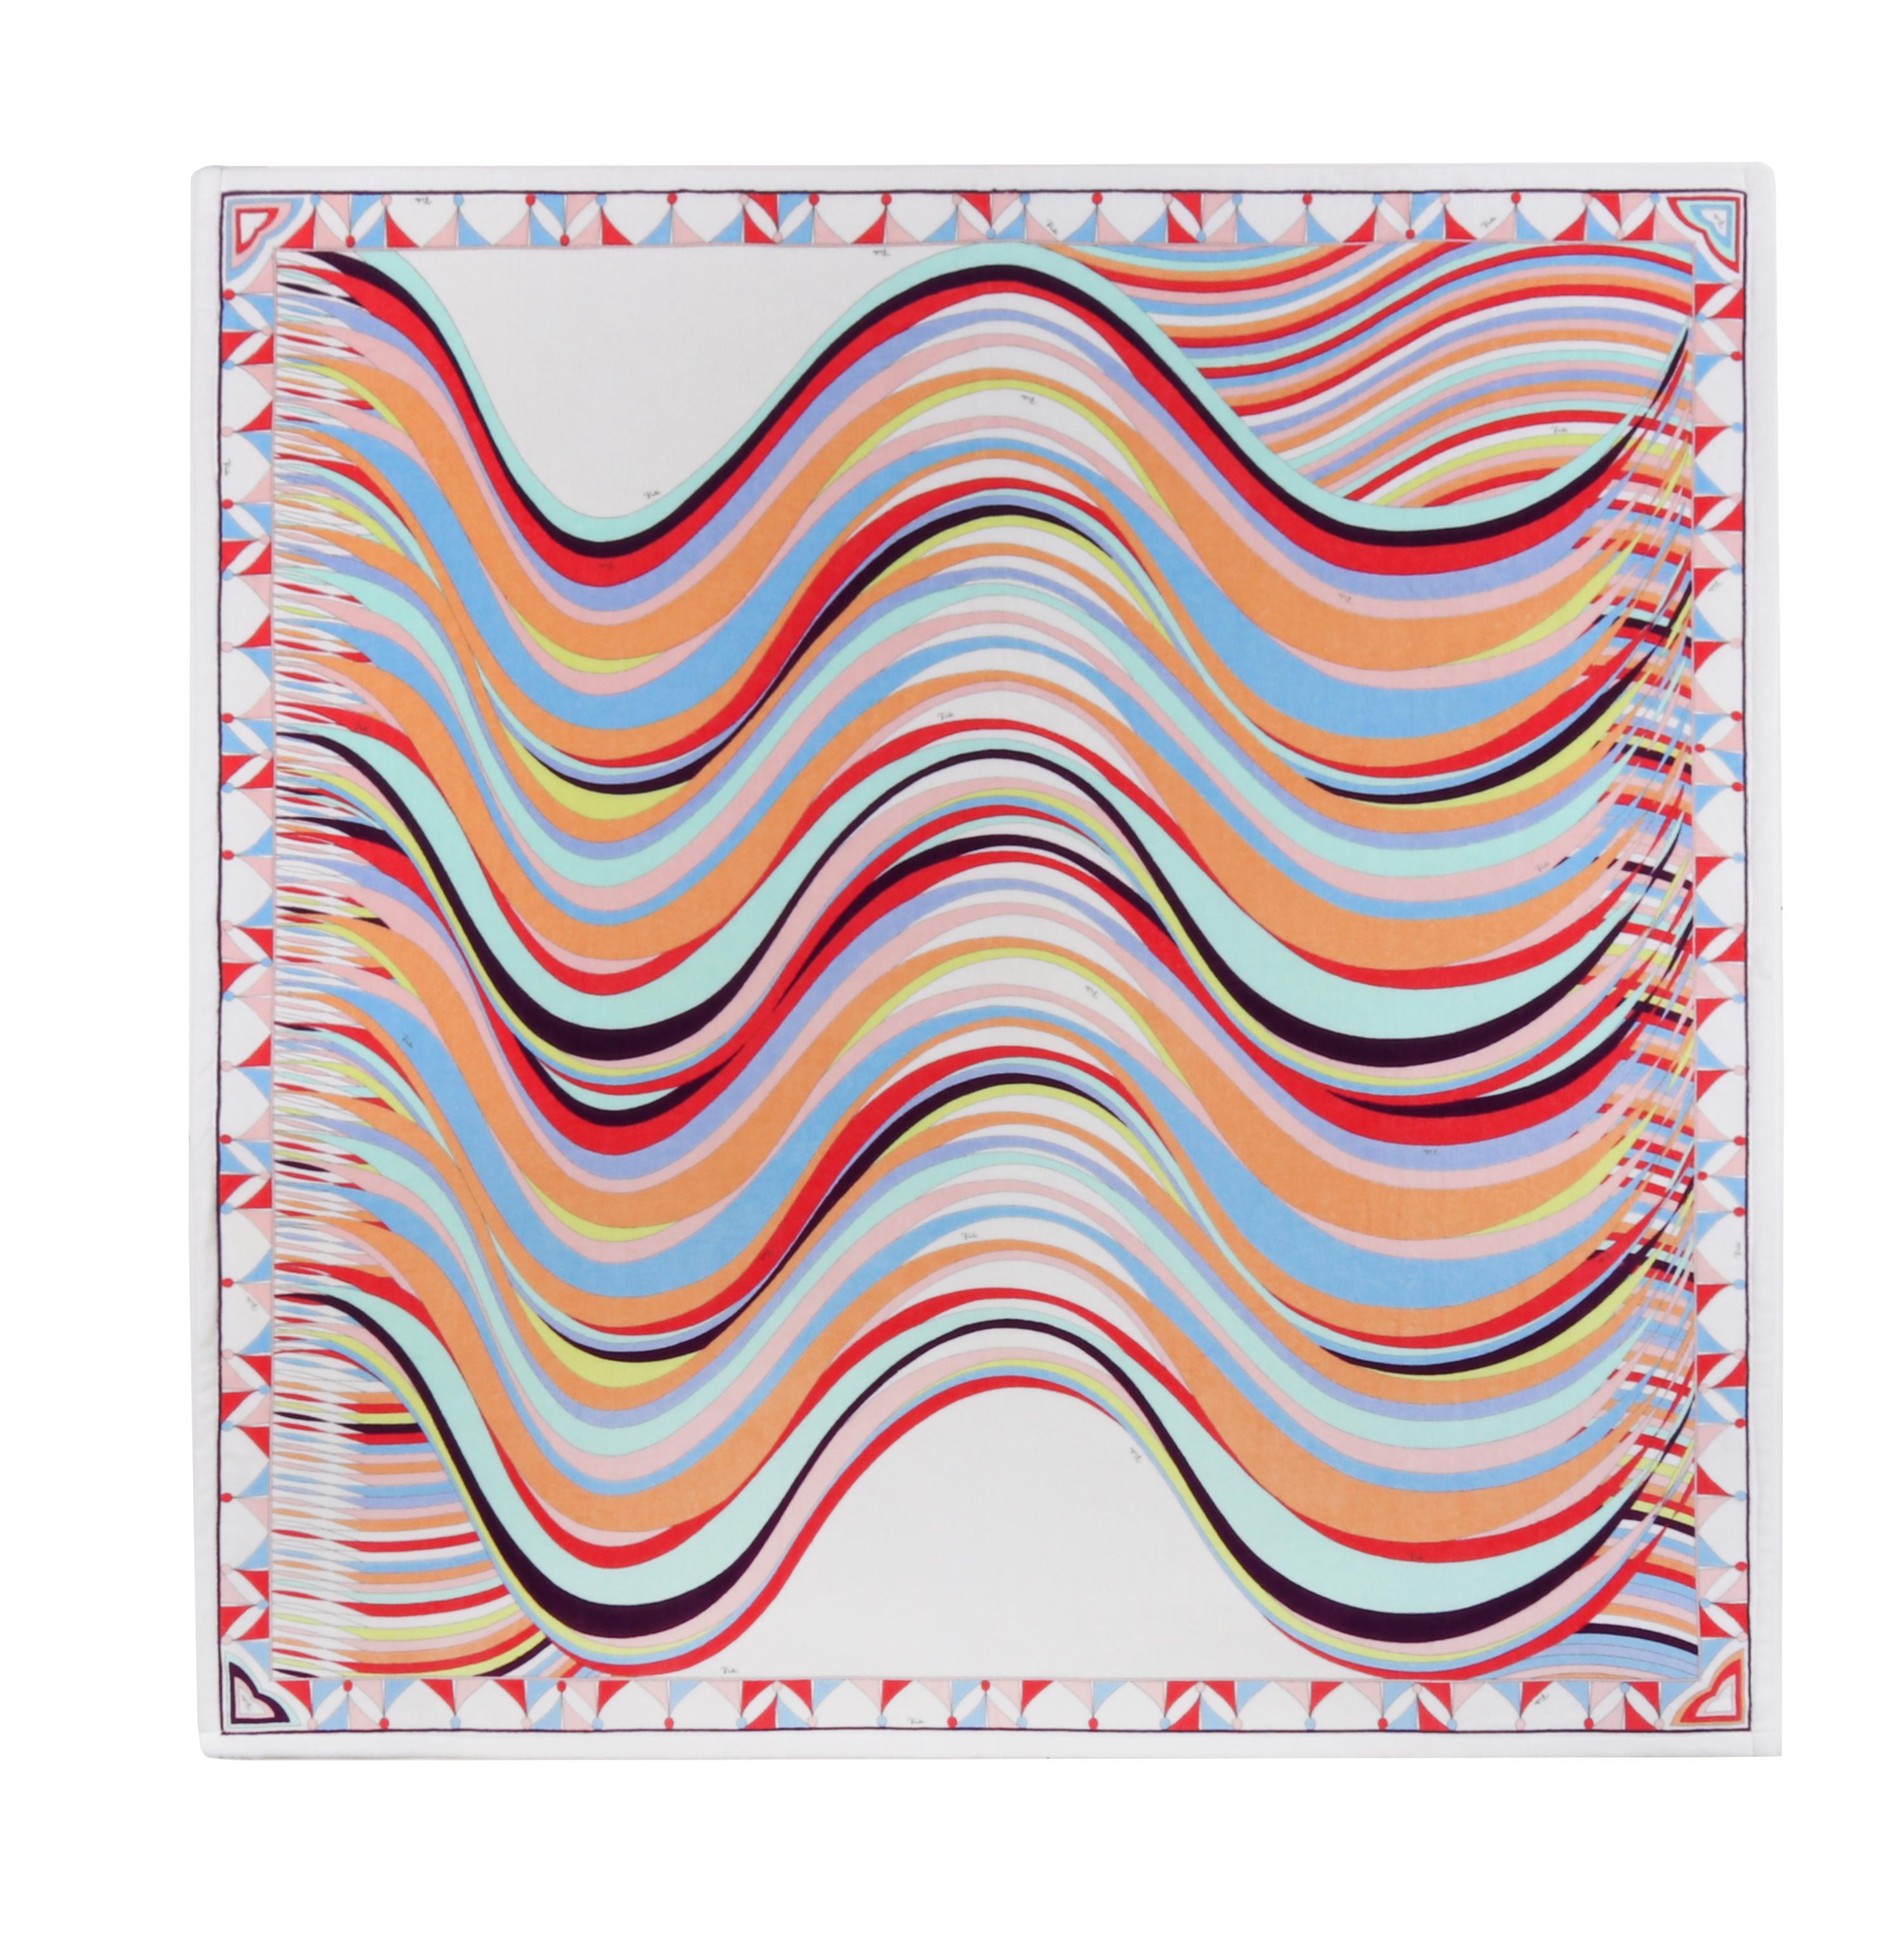 EMILIO PUCCI Multicolor Large / Oversized Square Abstract Wave Signature Print Beach Pool Towel

Style: Beach towel
Color(s): Shades of pink, black, white, blue, red, orange, yellow, and purple
Lined: No
Unmarked Fabric Content (feel of): Terry